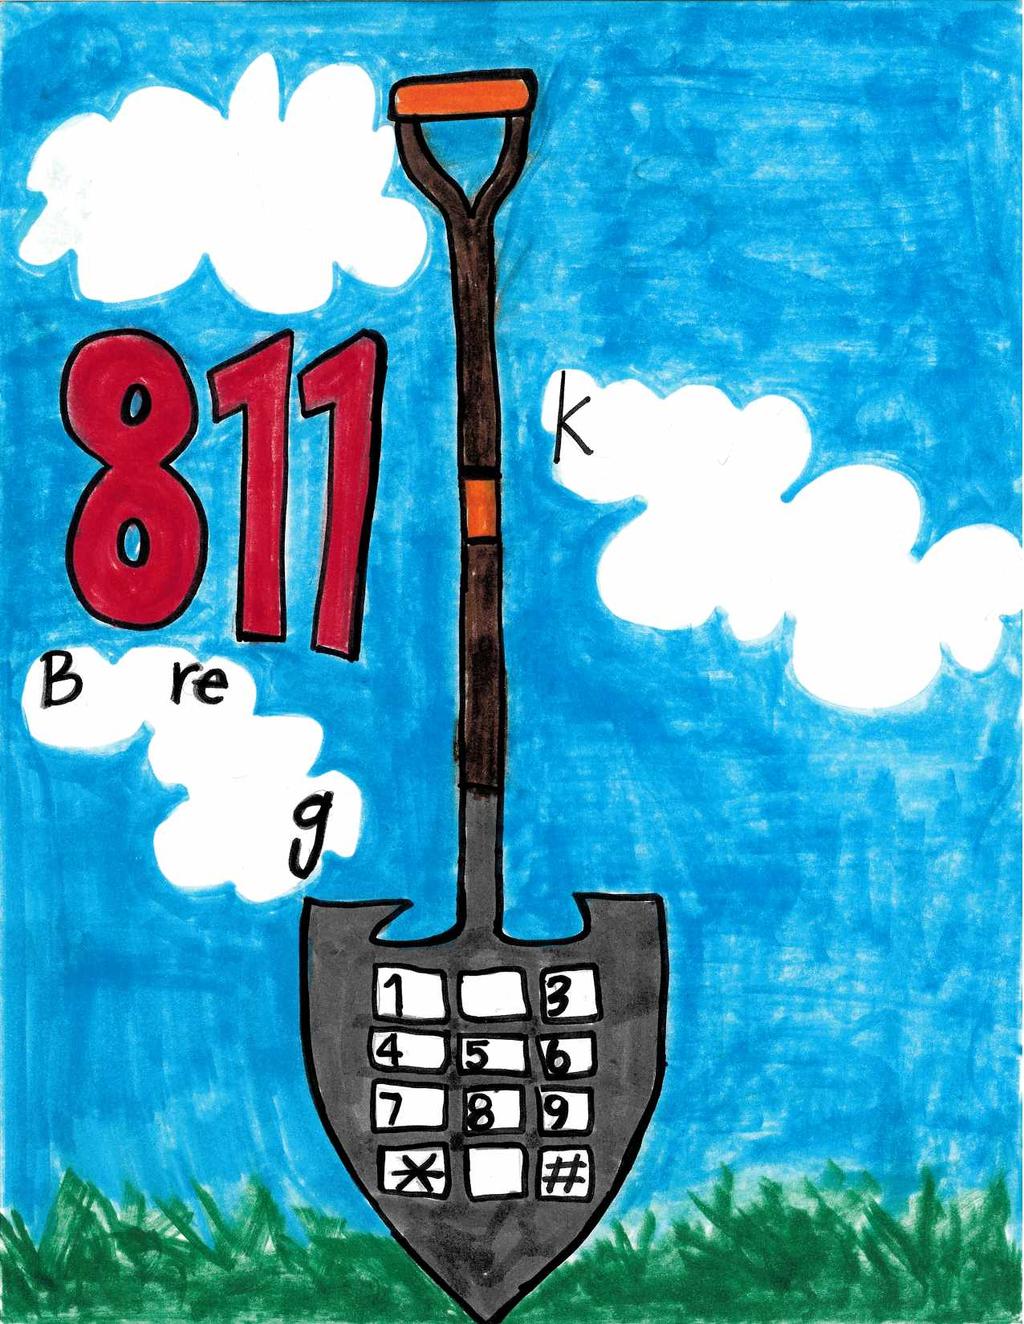 SAFETY FACT How did 811 become the